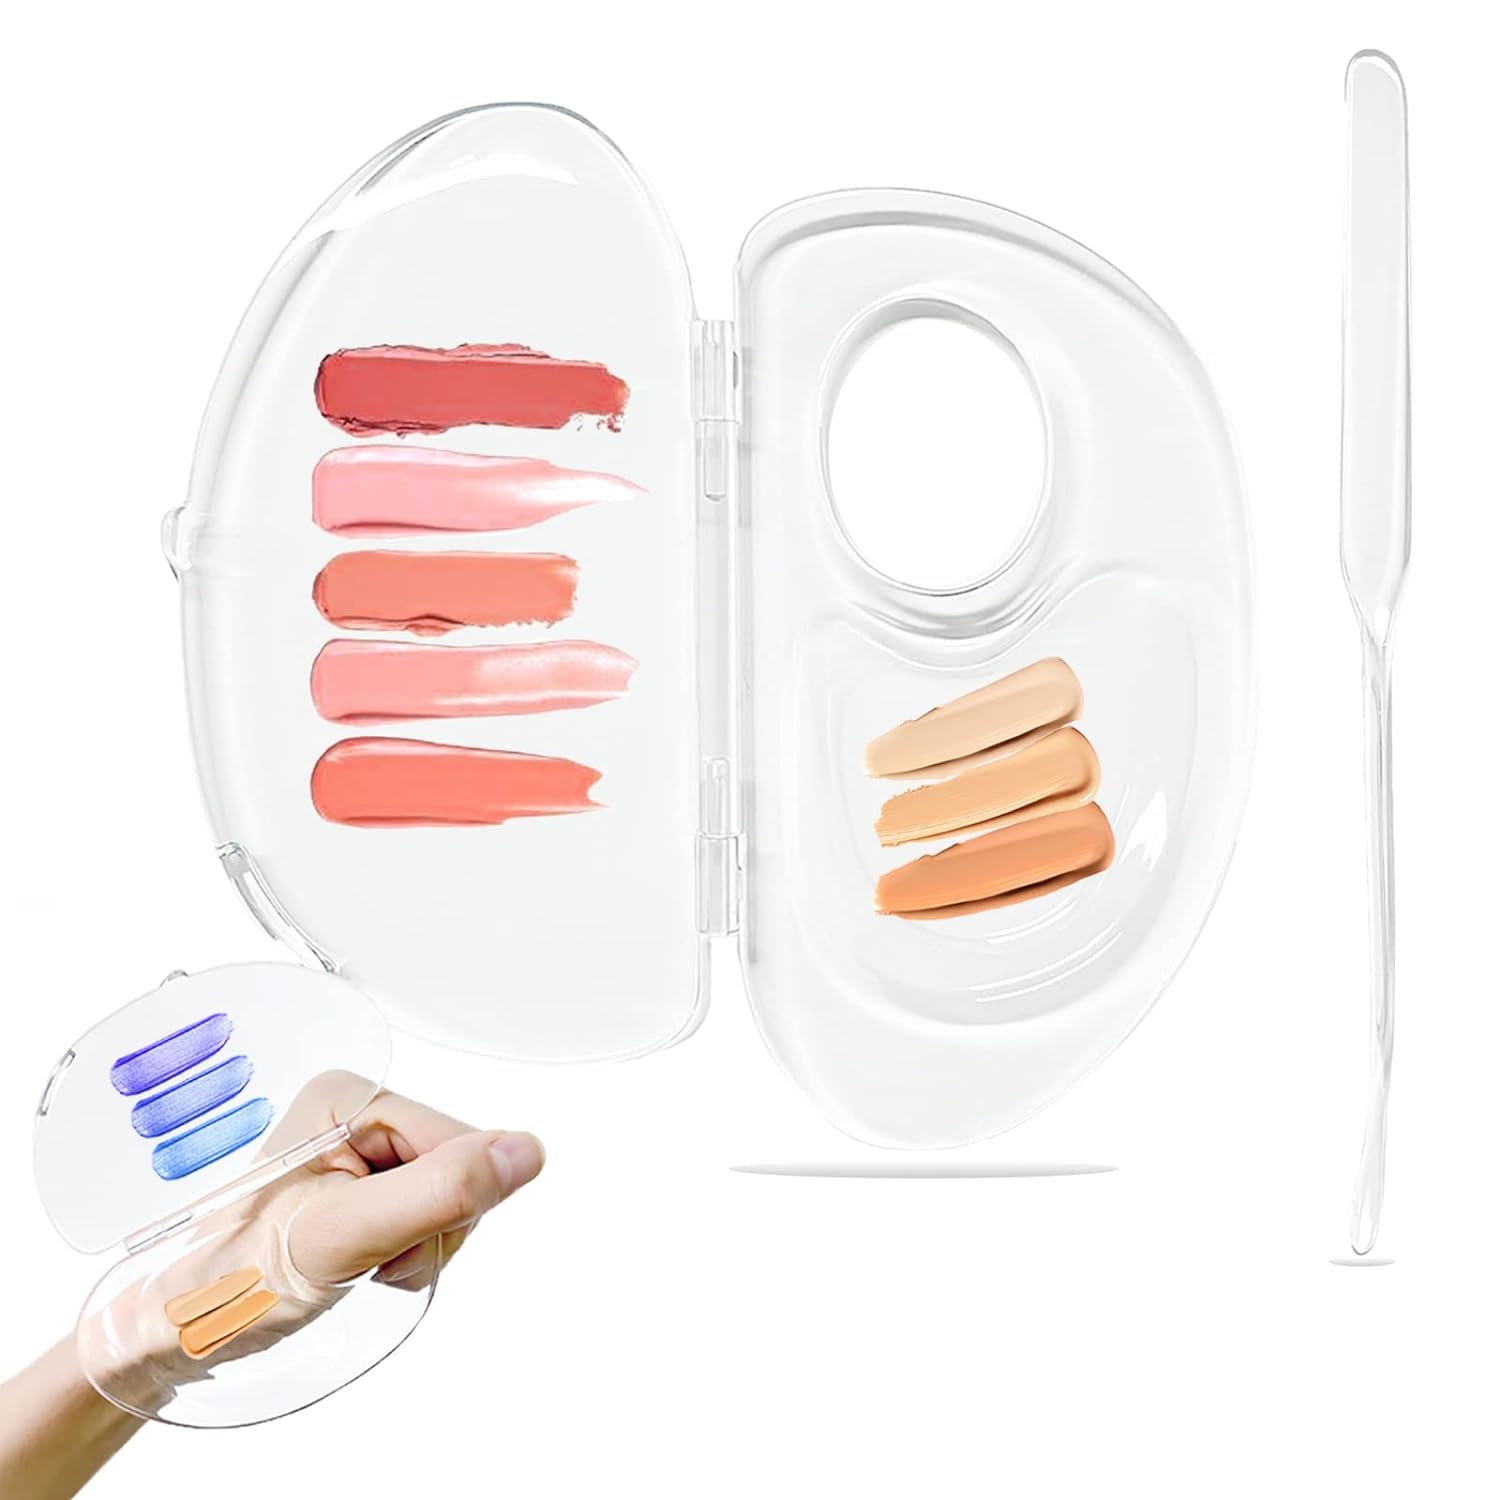 Banugo Makeup Mixing Palette, Acrylic Cosmetic Palette and Spatula, Upgraded Foundation Palette, Foundation Mixing Tray for Makeup Artist and Beginner